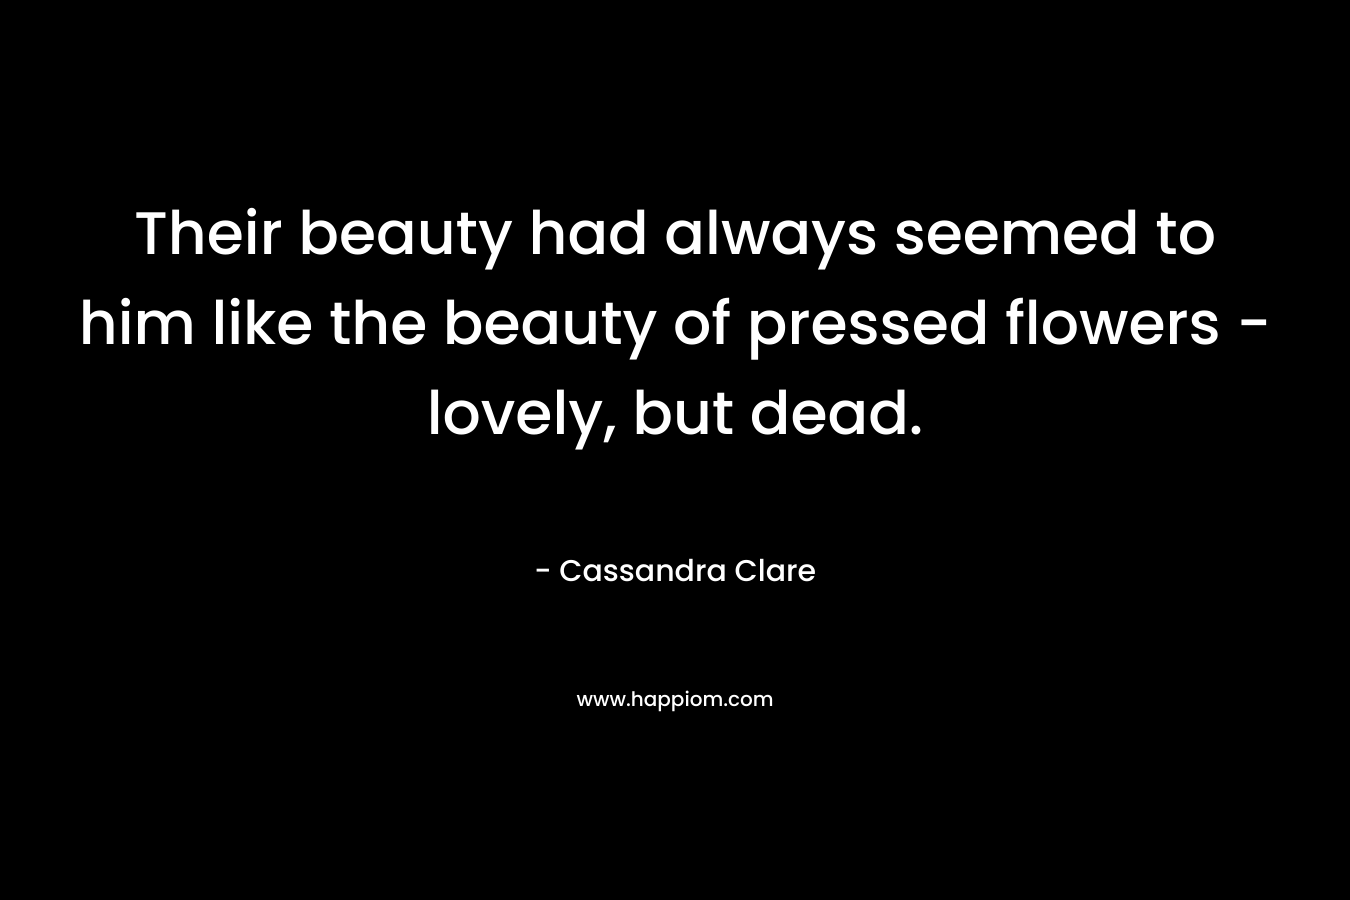 Their beauty had always seemed to him like the beauty of pressed flowers - lovely, but dead.